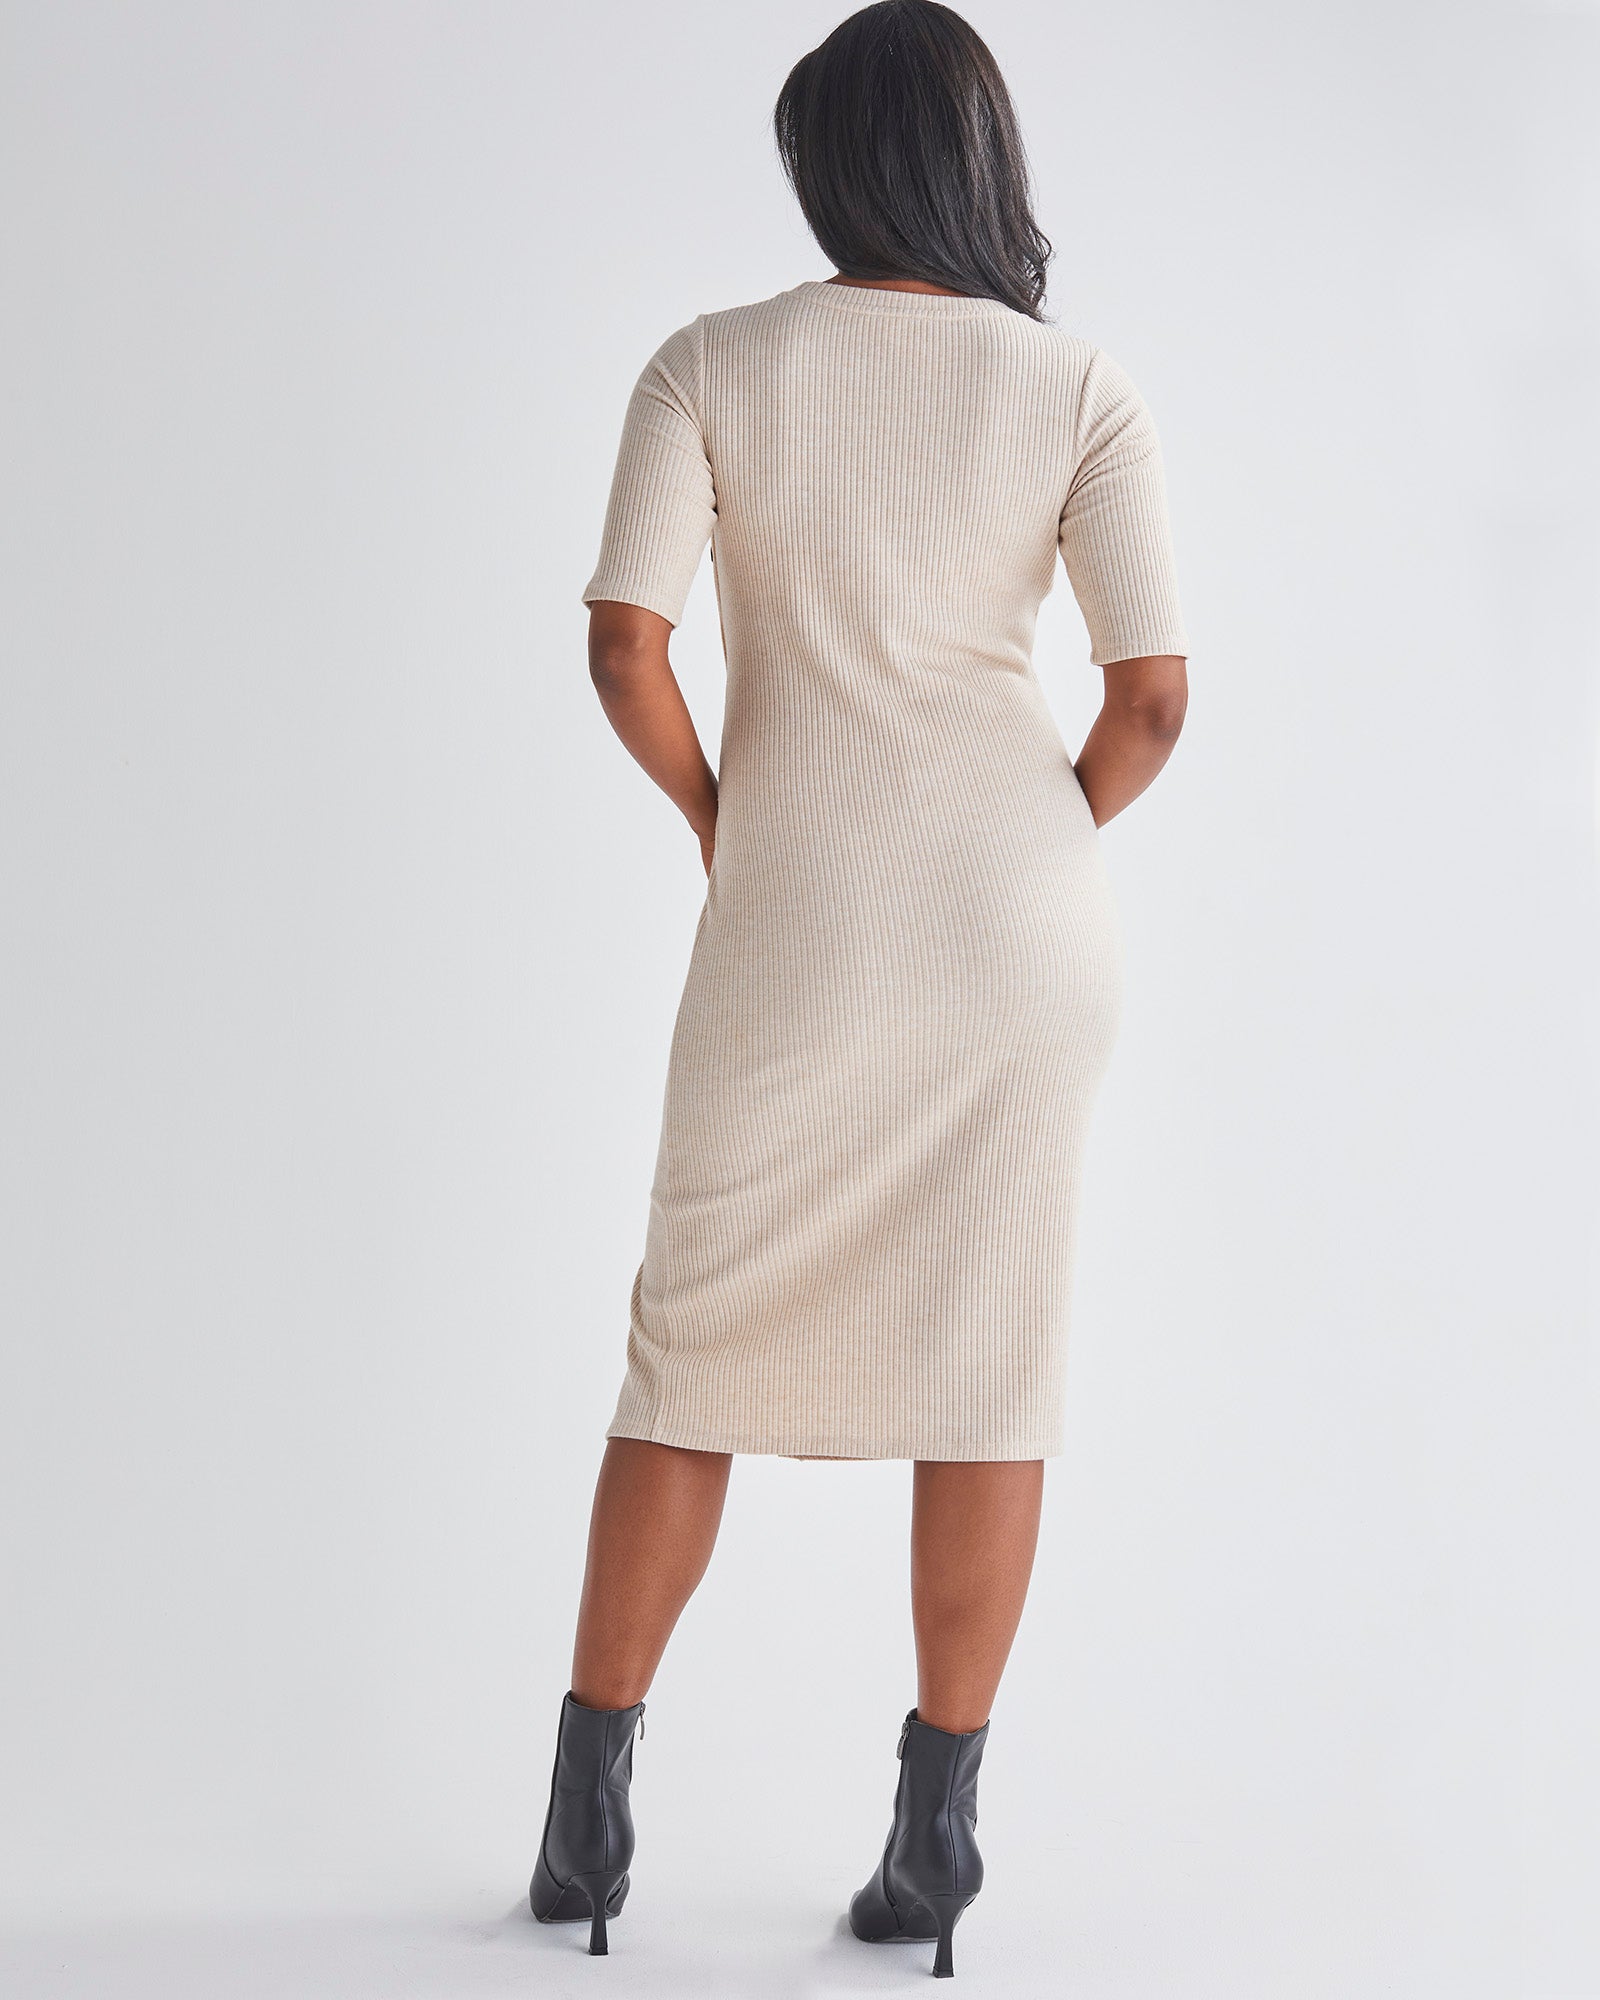 back view- Maternity Bodycon Dress- Side Button detail Fashion-forward Design Functionality Comfort Flattering Fit from AngelMaternity